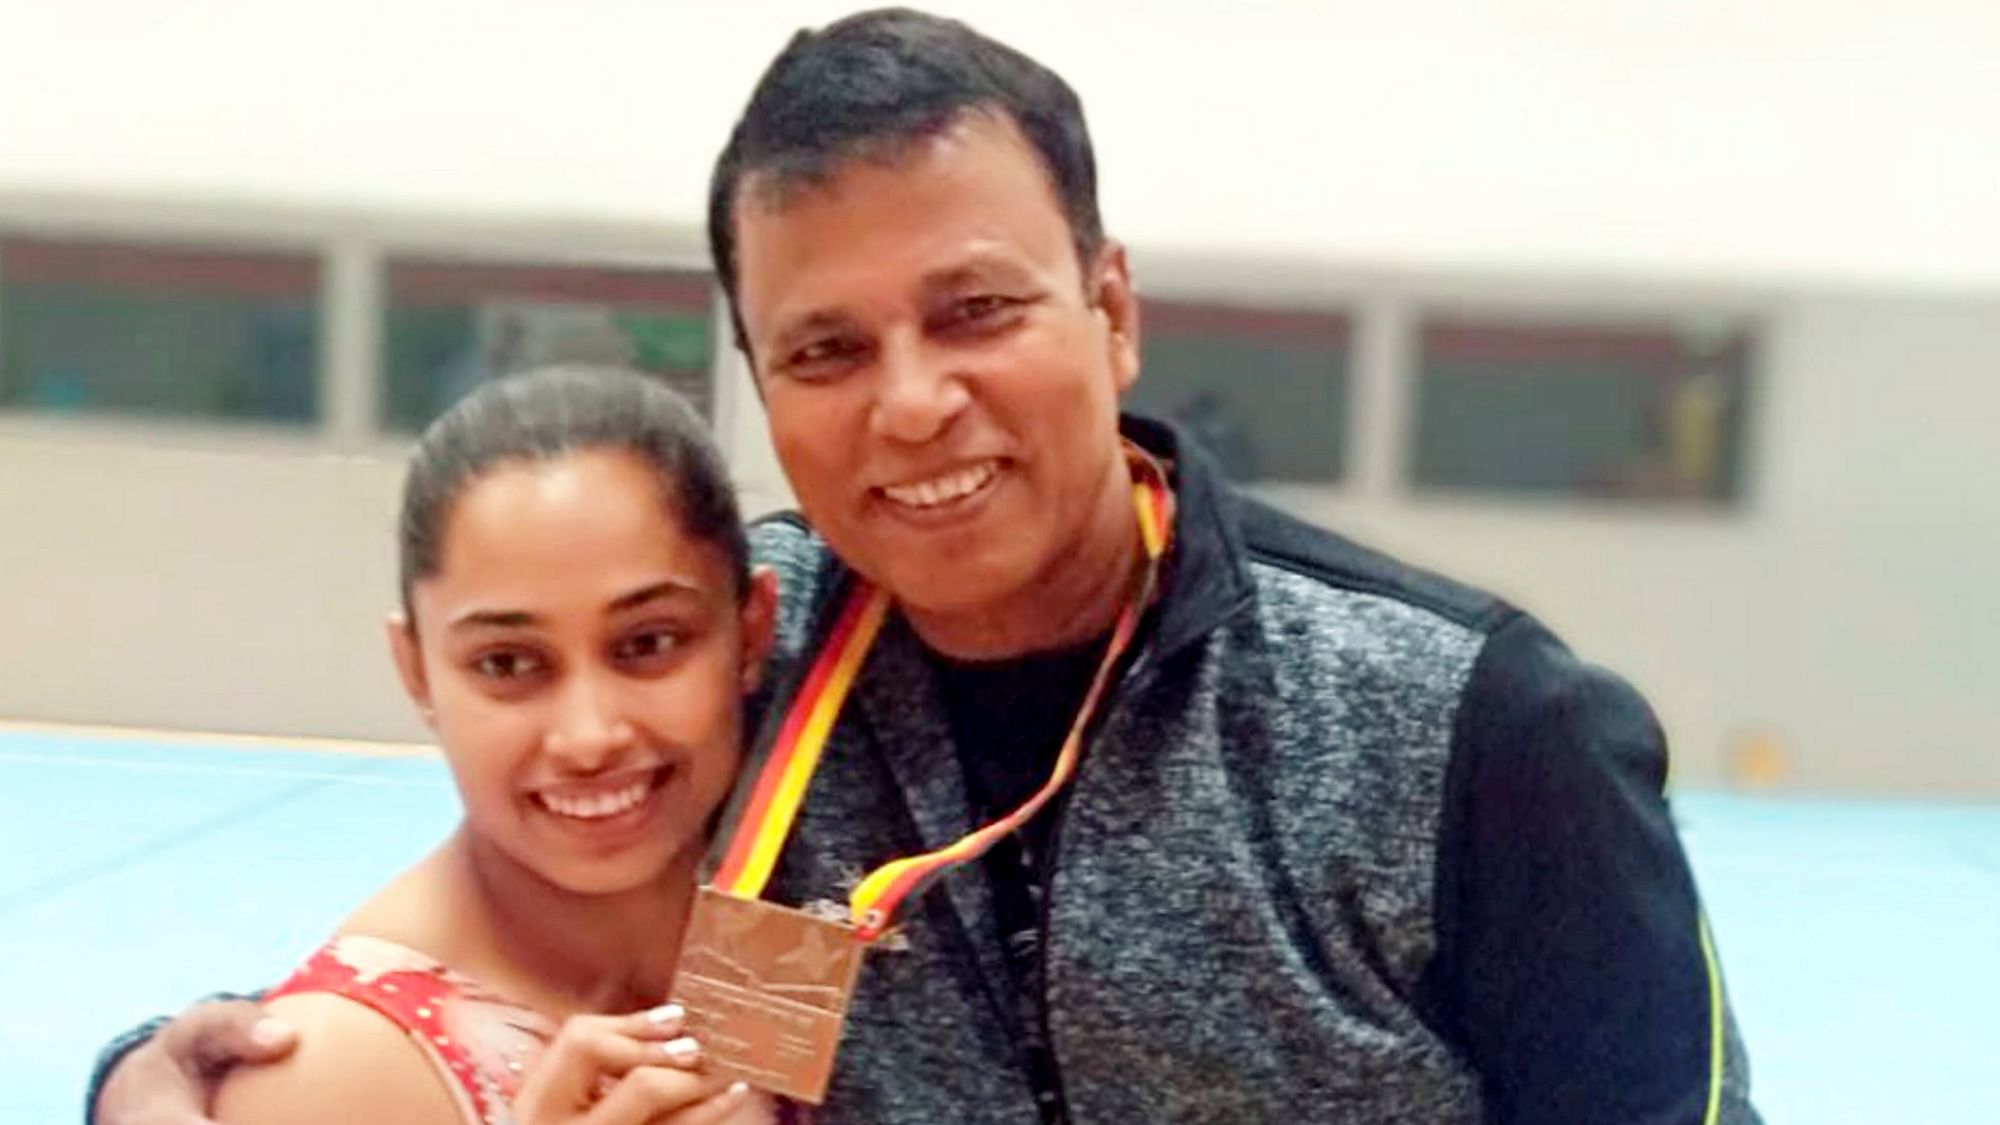 Dipa Karmakar won a bronze medal at the Artistic Gymnastics World Cup in Cottbus, Germany.